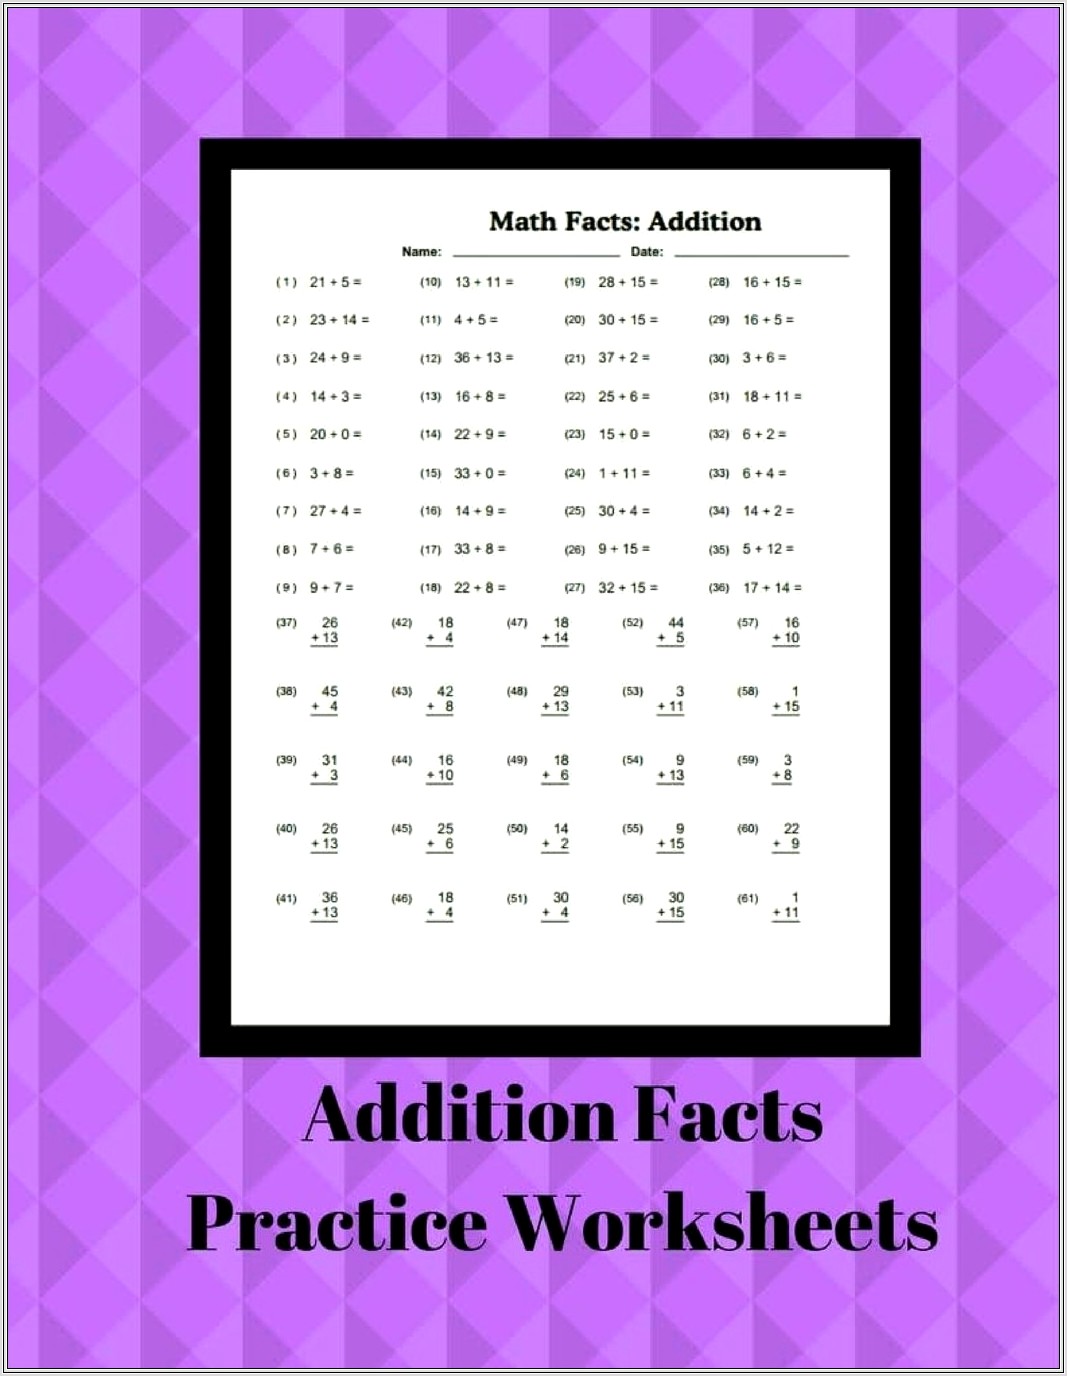 Math Facts Worksheets Online